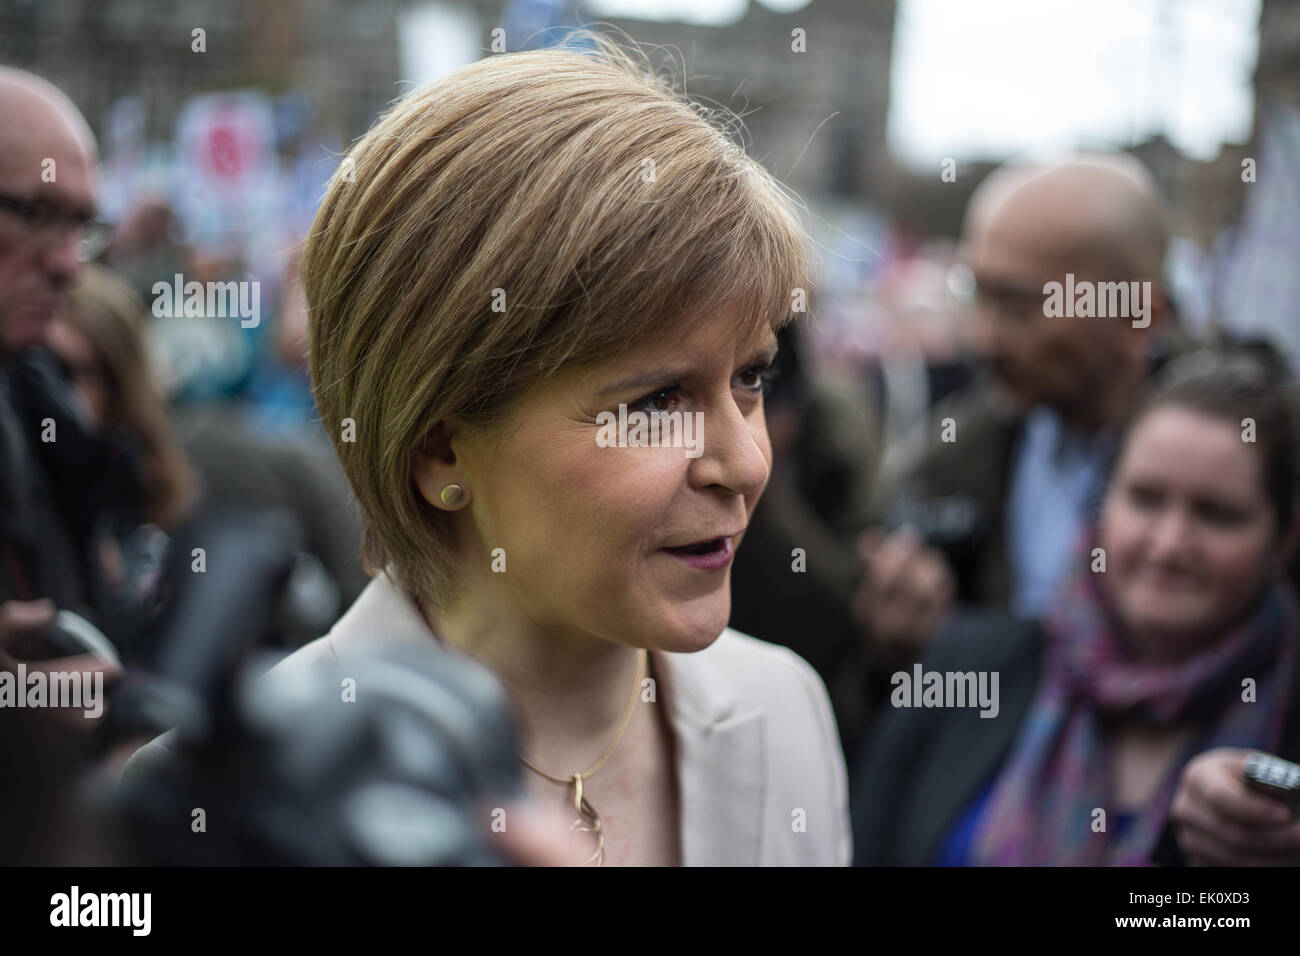 Glasgow, Scotland, UK. 4th April, 2015. Nicola Sturgeon, First Minister of Scotland and leader of the Scottish National Party, speaks at an anti-Trident demonstration, in George Square, Glasgow, Scotland, on 4th April 2015. Credit:  jeremy sutton-hibbert/Alamy Live News Stock Photo